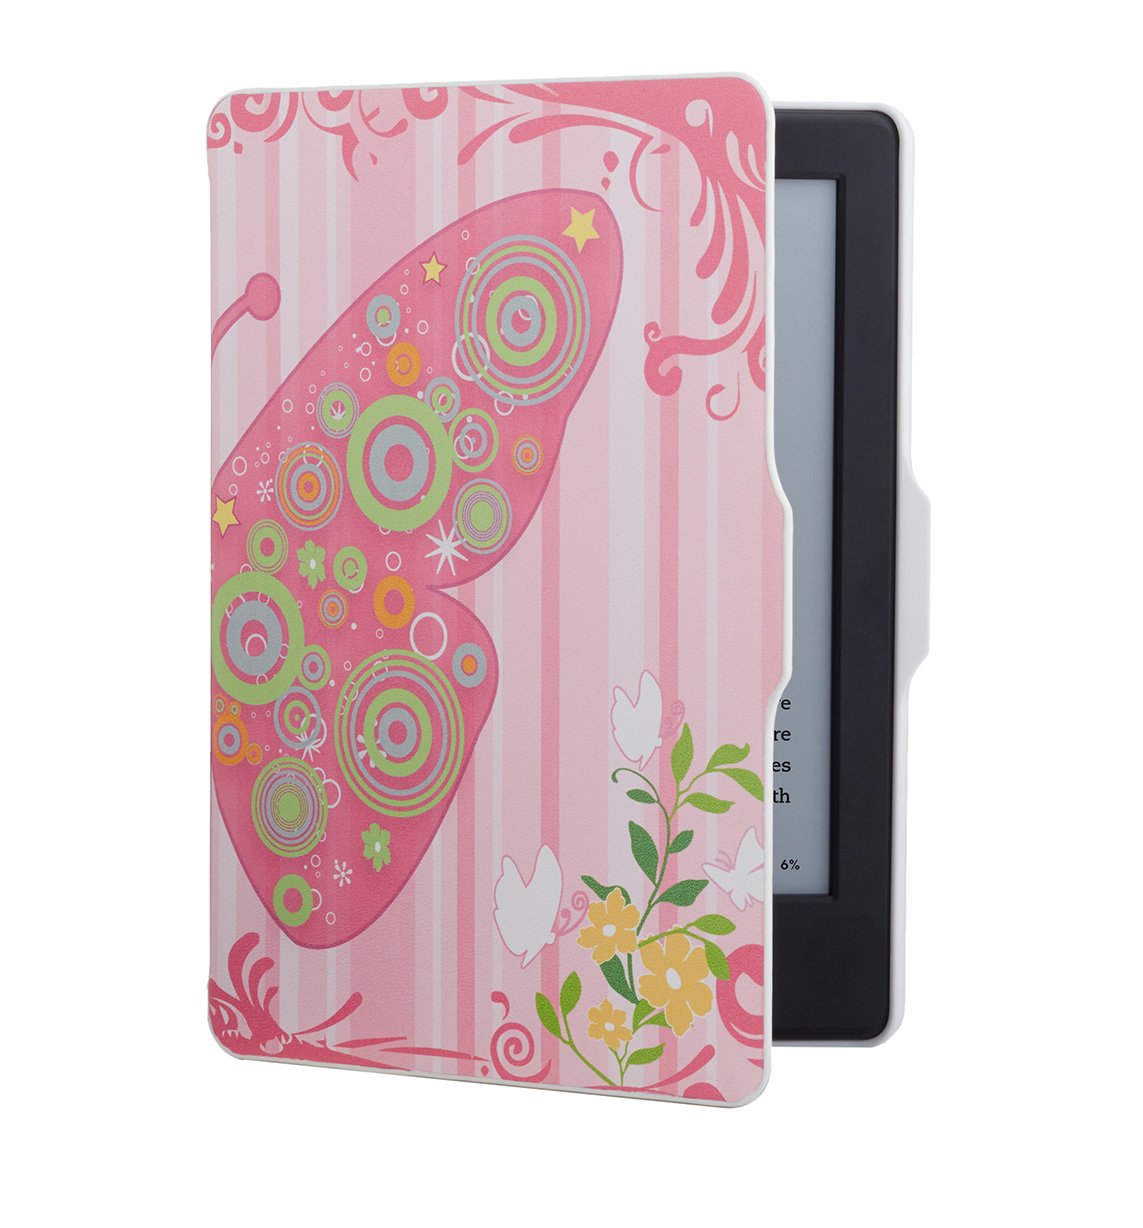 Nupro Kindle Case - Butterfly (8th Generation - will not fit Paperwhite, Oasis or any other generation of Kindles)